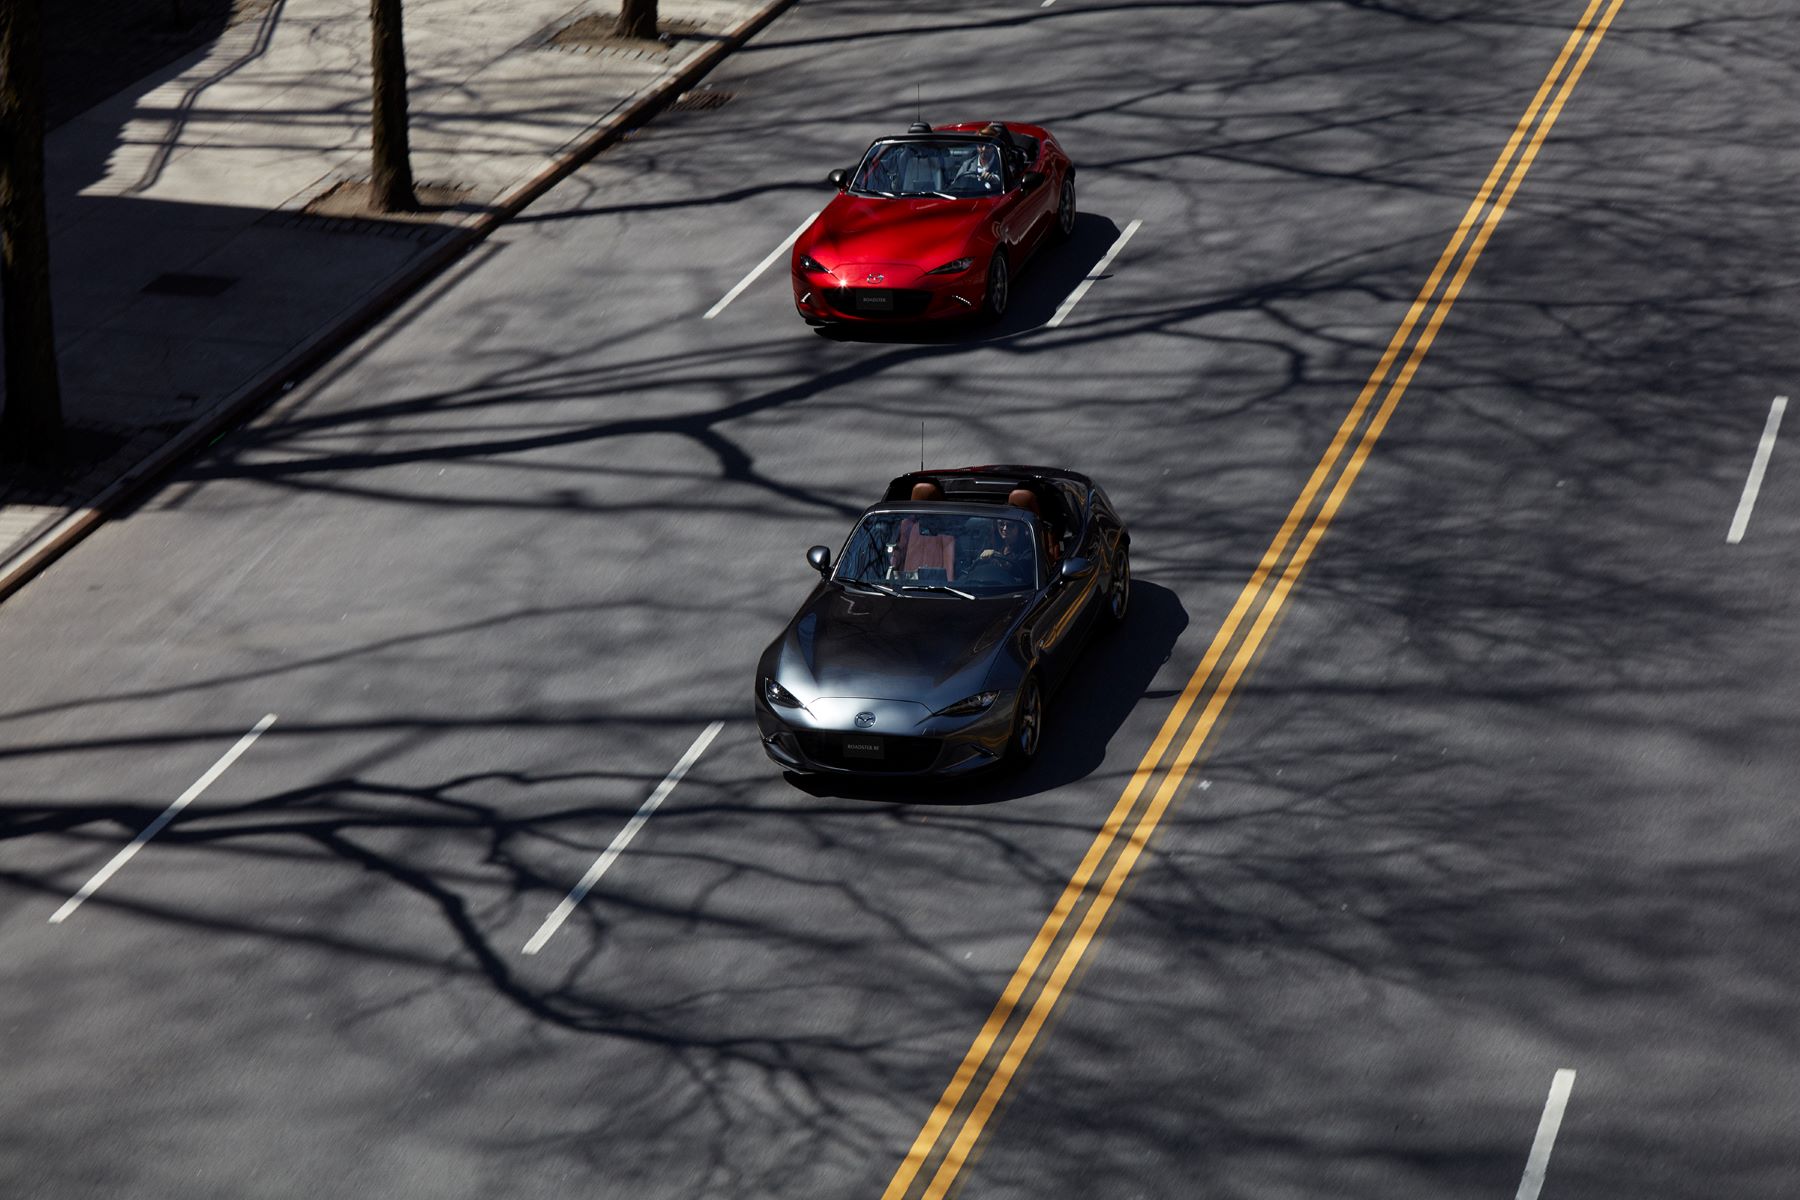 An overhead shot of 2022 Mazda MX-5 Miata sports car roadster convertible models in gray and red